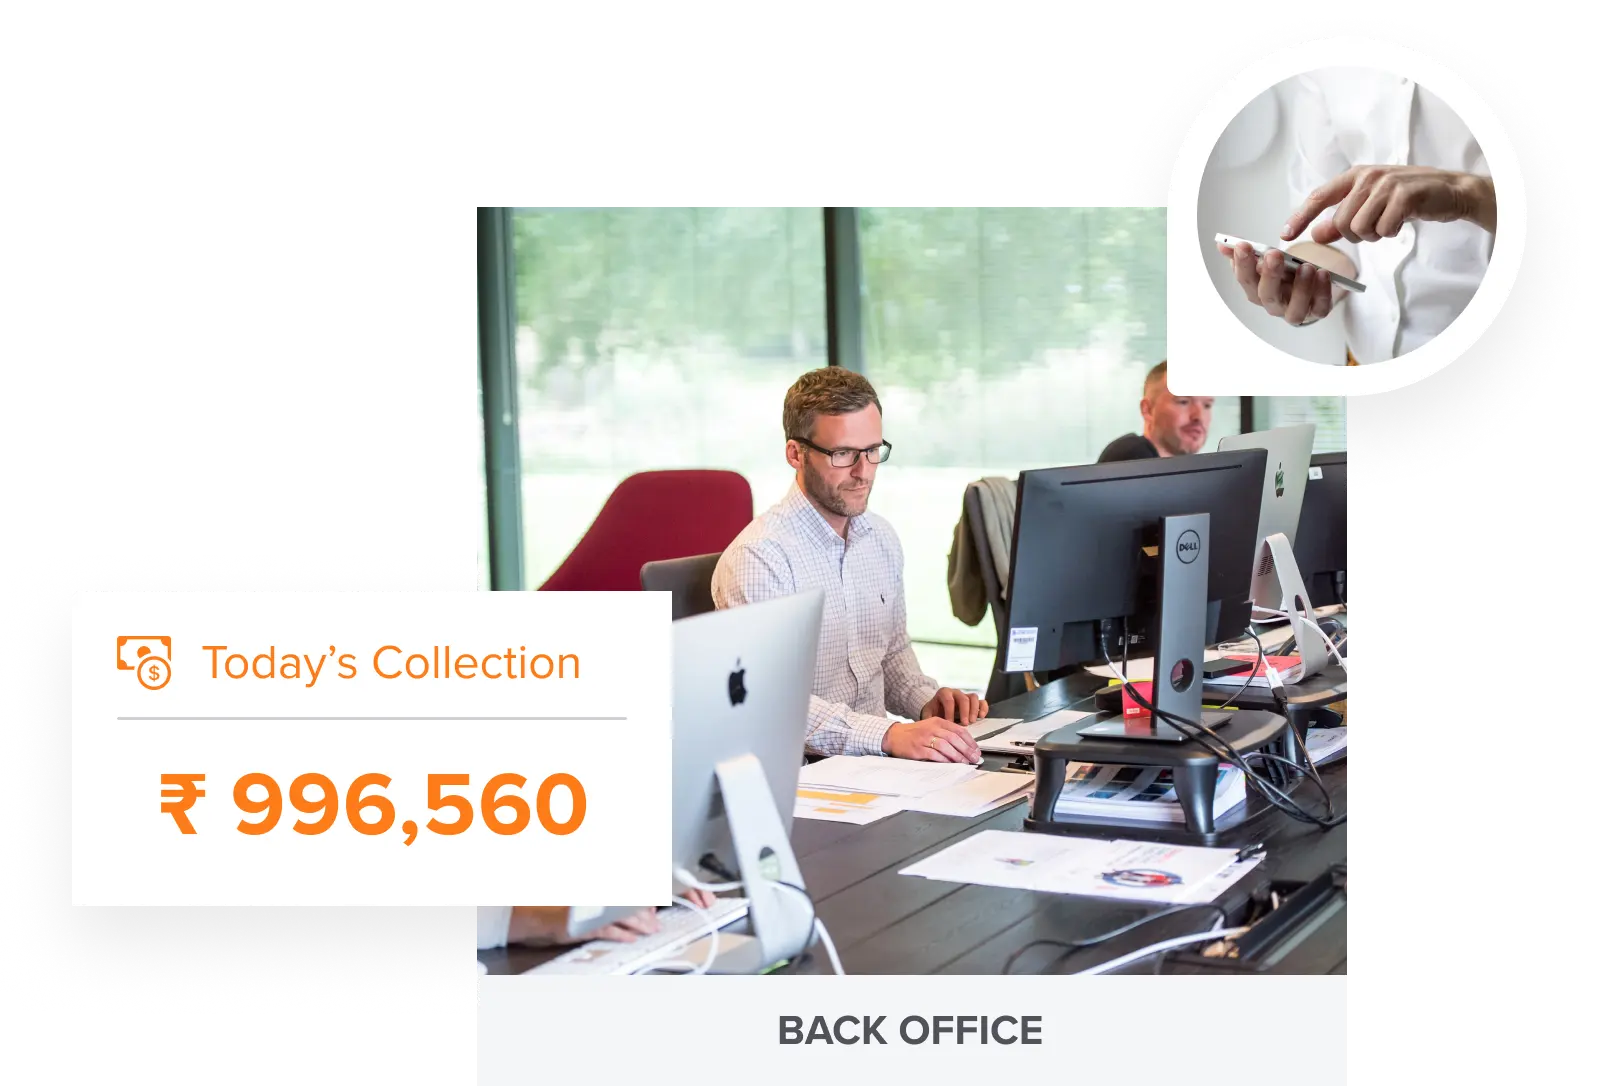 distributo-receivable-and-collection-management-check-daily-basis-collection-status